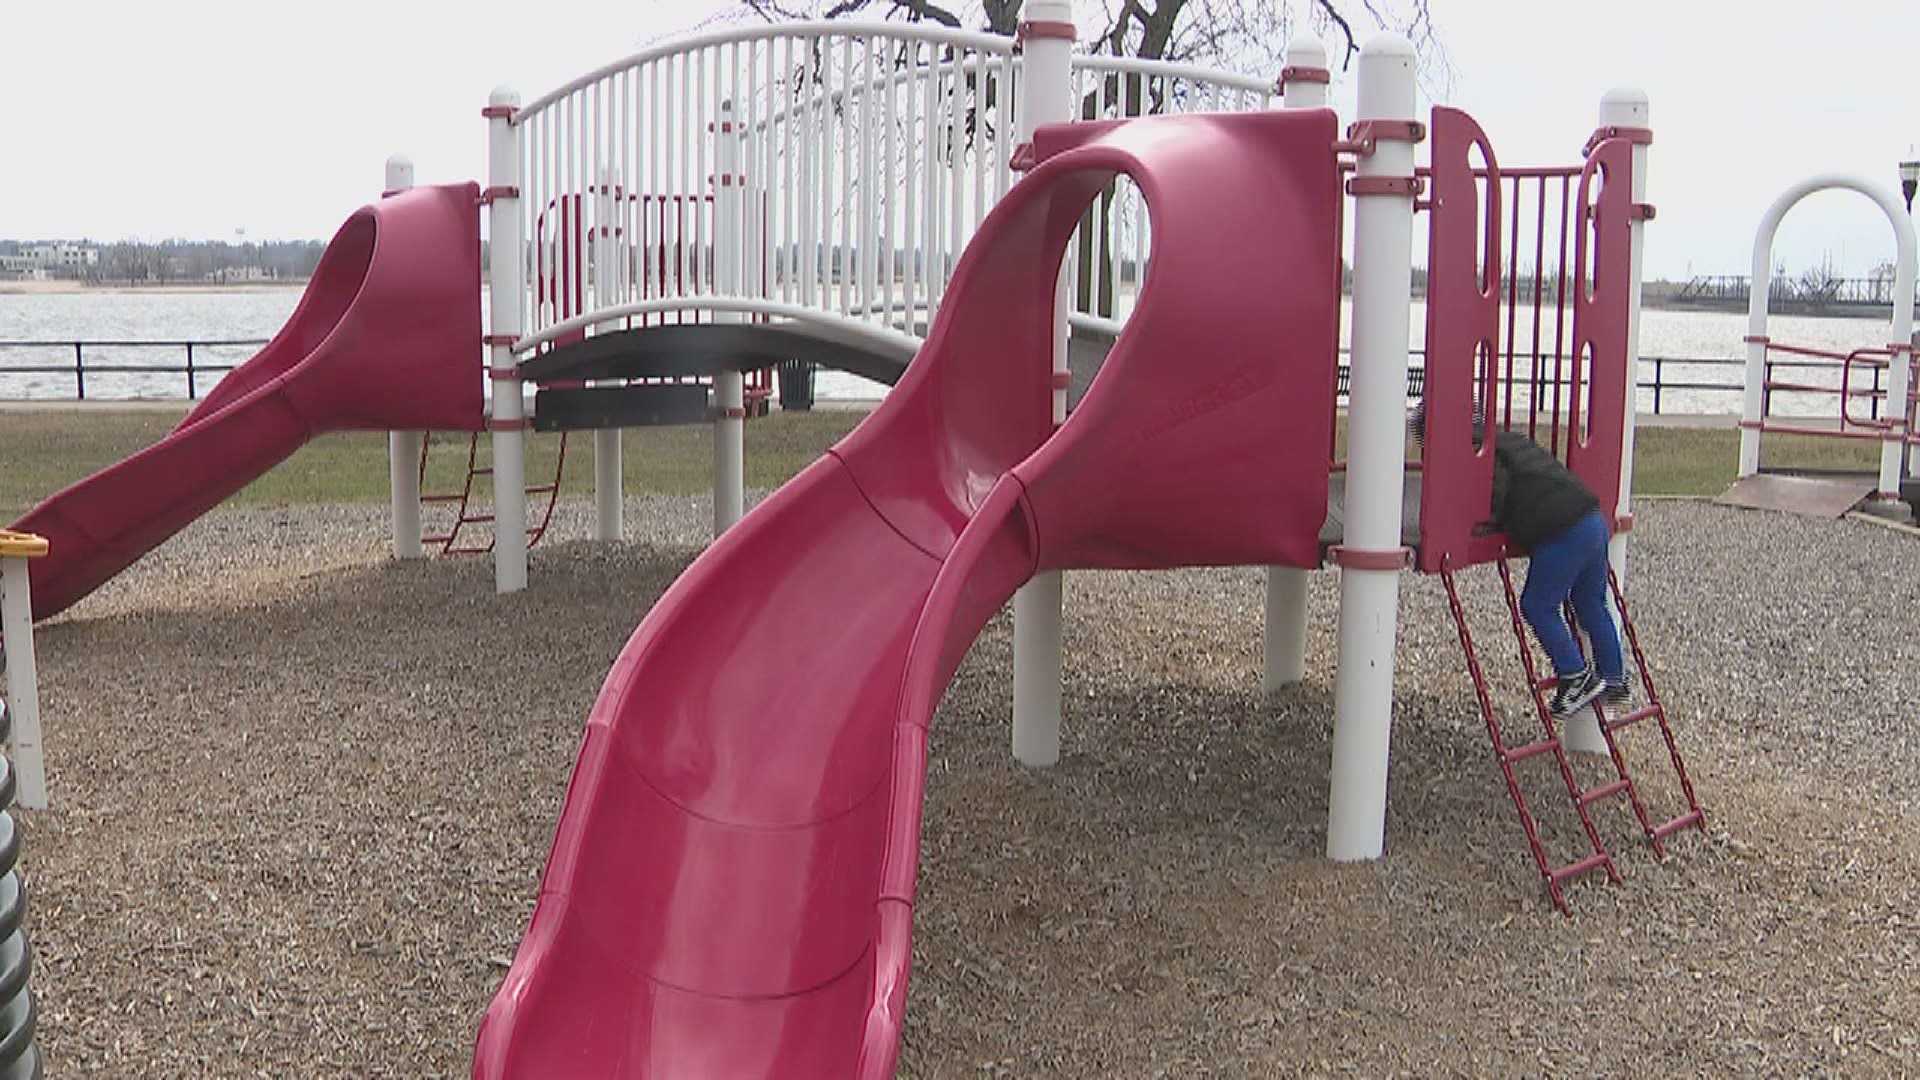 The City of Davenport is putting together a 10-year plan, and want's the public's help in improving local parks, golf courses.